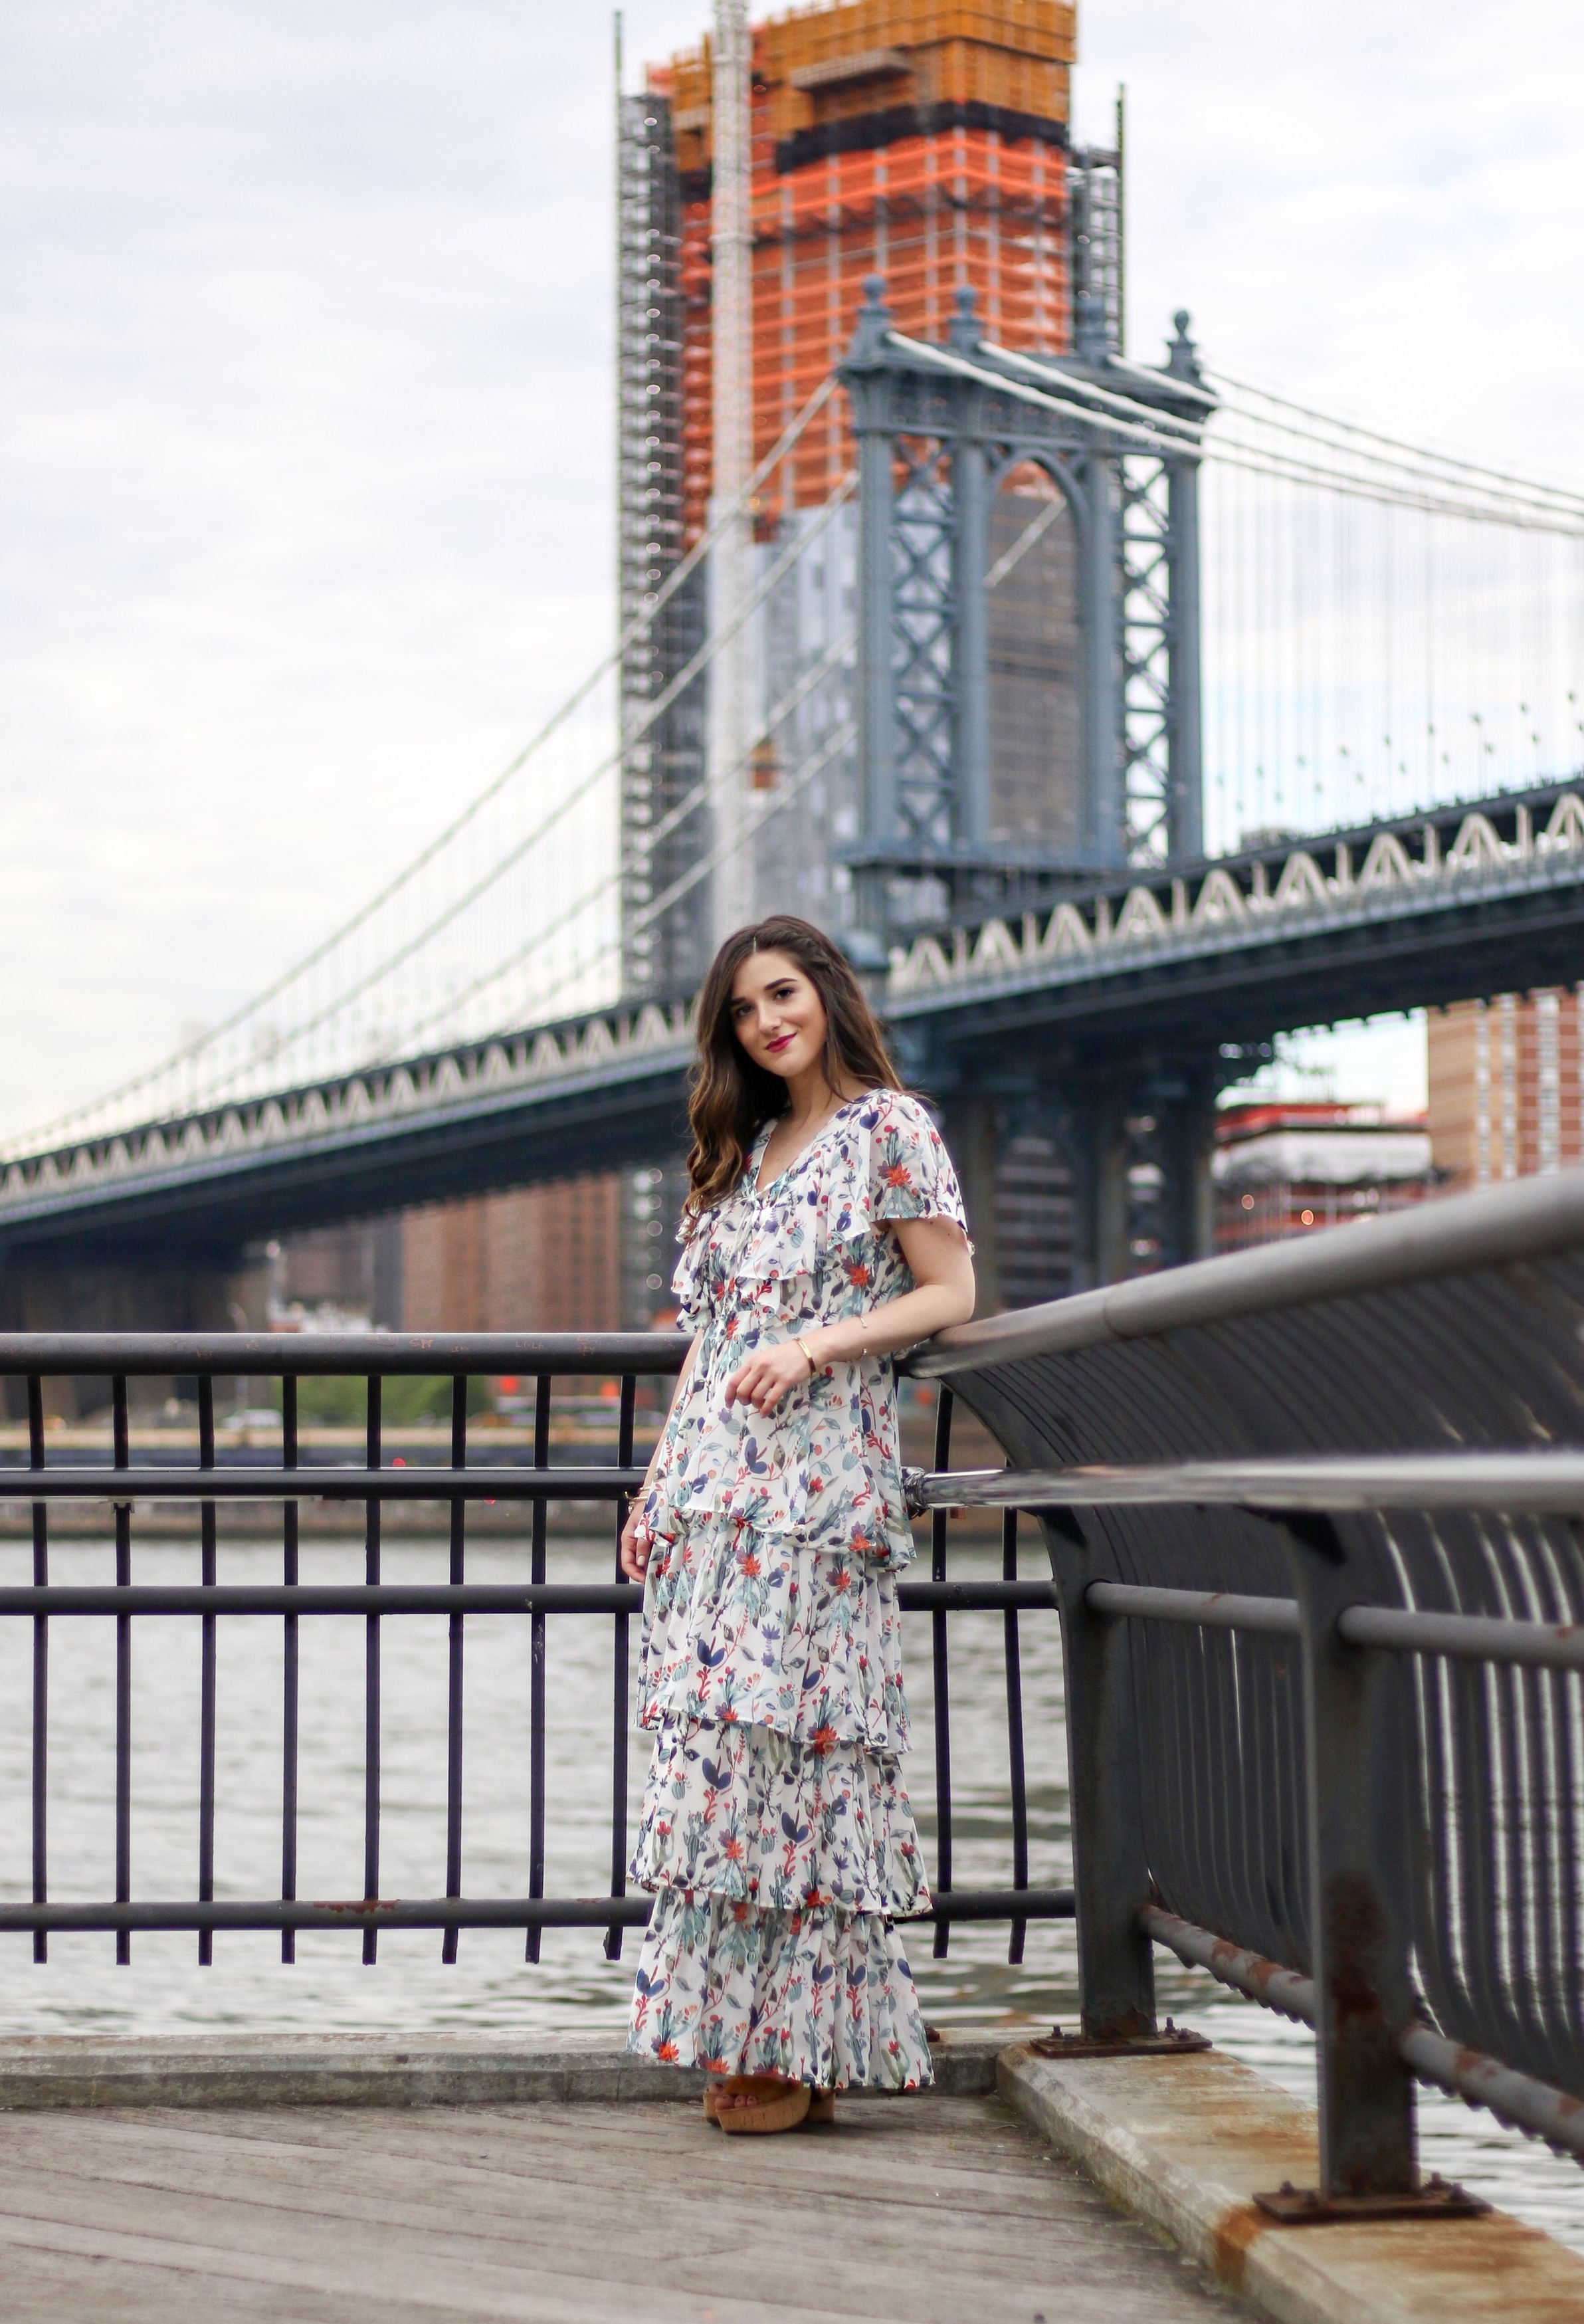 Ruffle Floral Maxi Dress Why You Should Trust Me Esther Santer Fashion Blog NYC Street Style Blogger Outfit OOTD Trendy Summer Outdoors Pretty Girly Photoshoot Feminine Beautiful Model Gold Bracelets Jewelry Accessories Shop Women Sandals Wedges Shoes.JPG